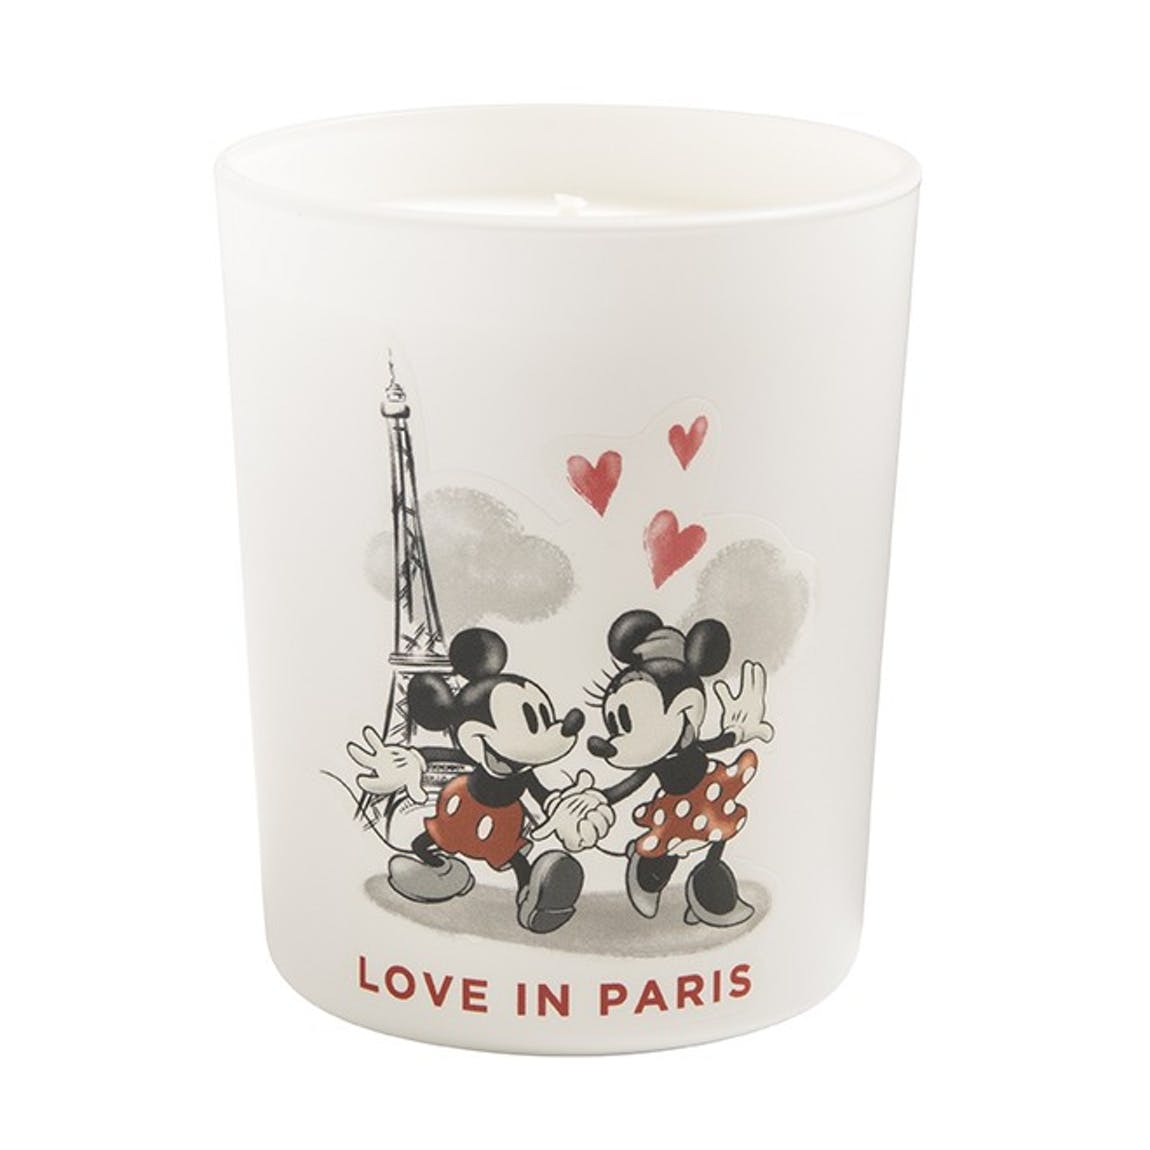 Maison Francal Disney Perfumed Candle Glass Edition: Mickey & Minnie Love in Paris